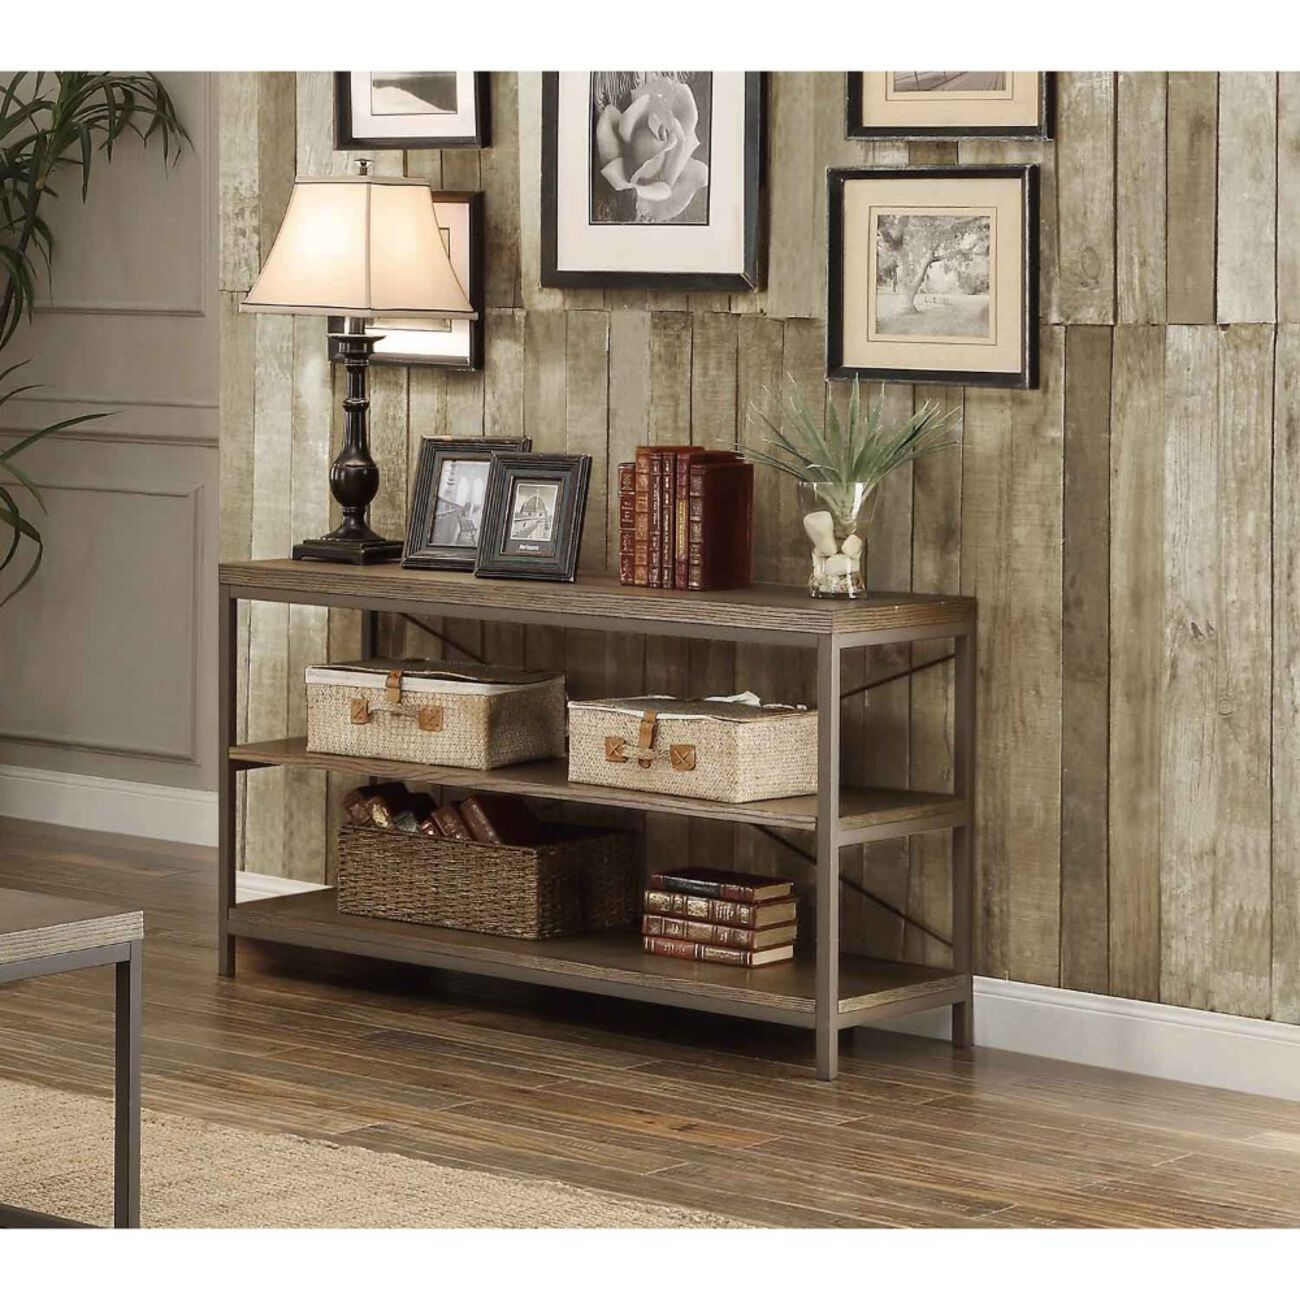 Rectangular Sofa Table In Metal Frame With Grey Weathered Wood And Shelves, Grey